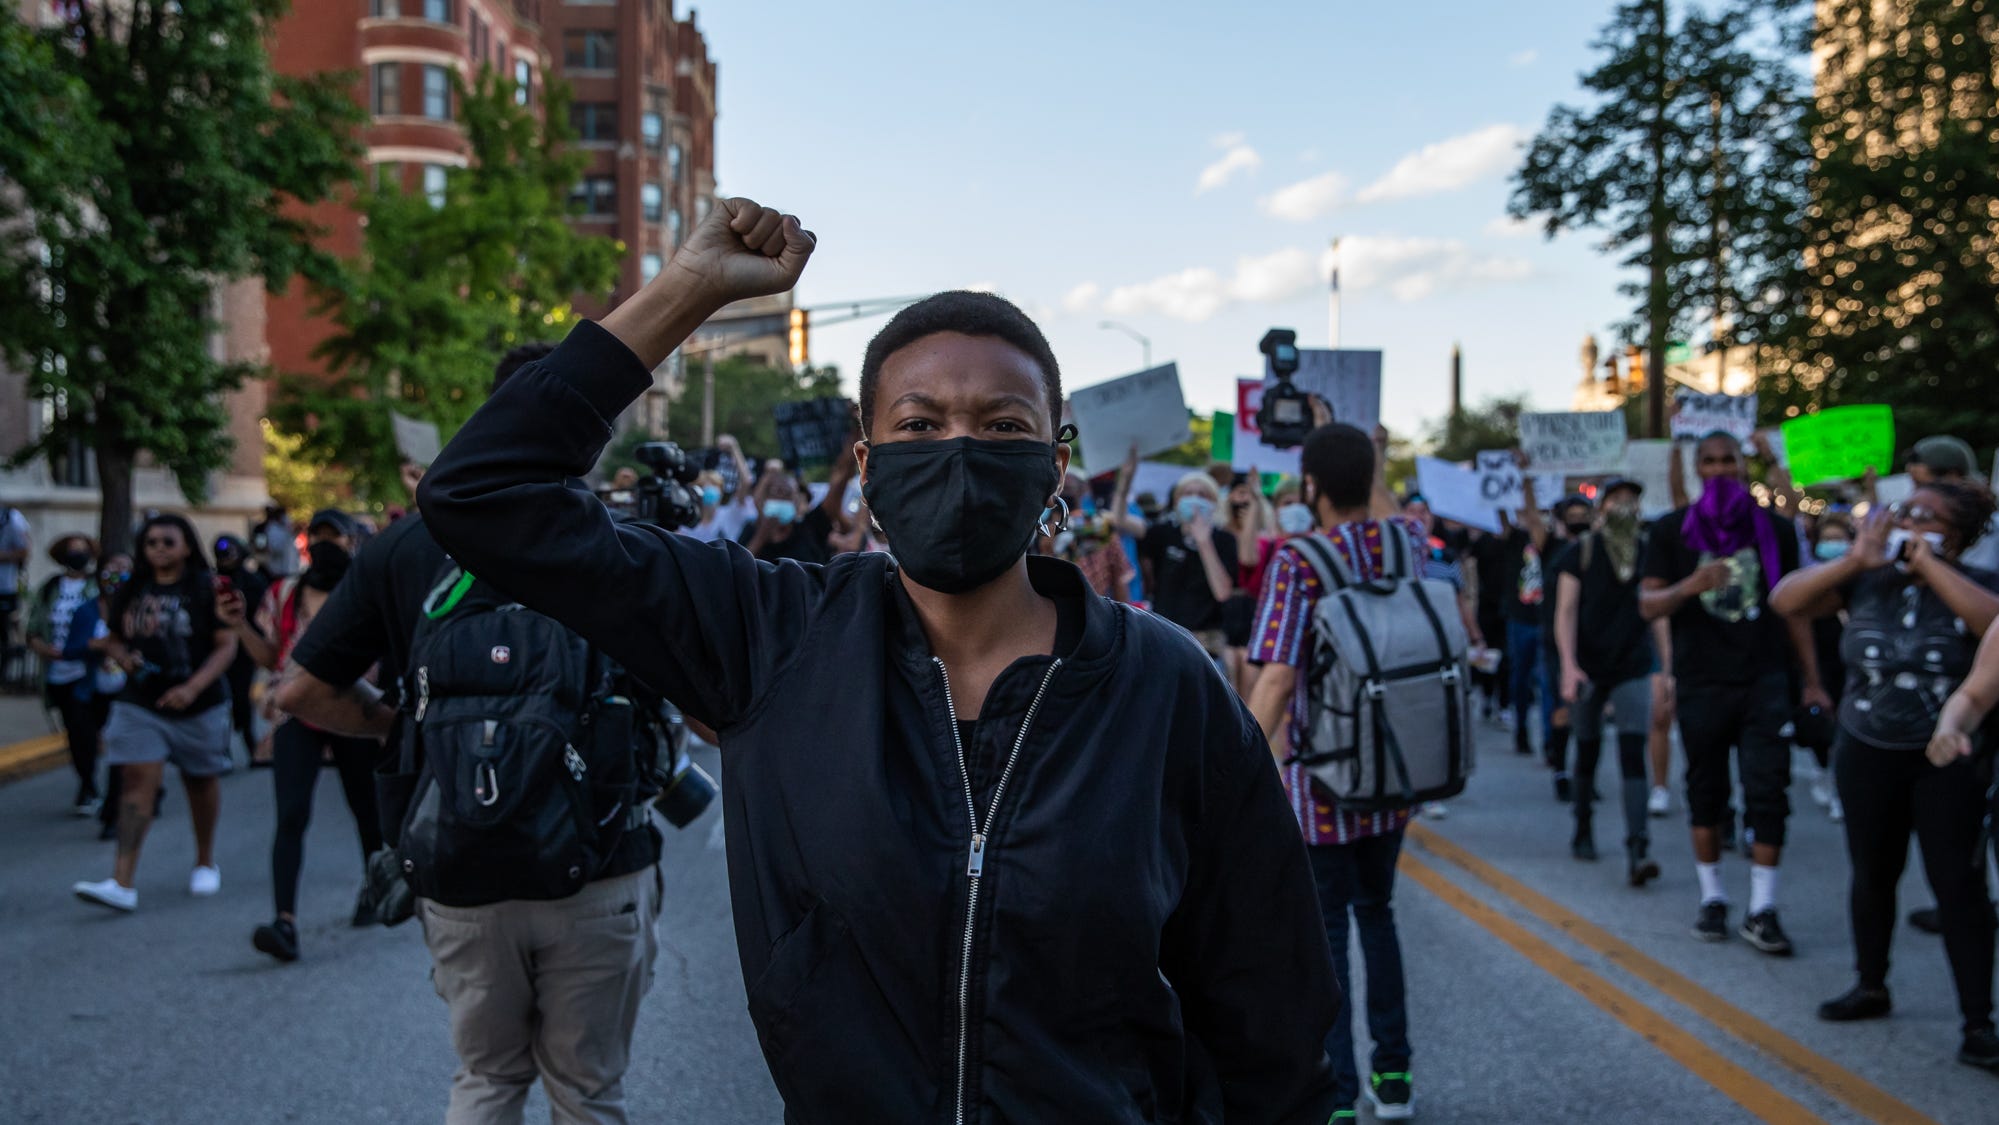 Indianapolis protests No charges for 'nonviolent' protesters